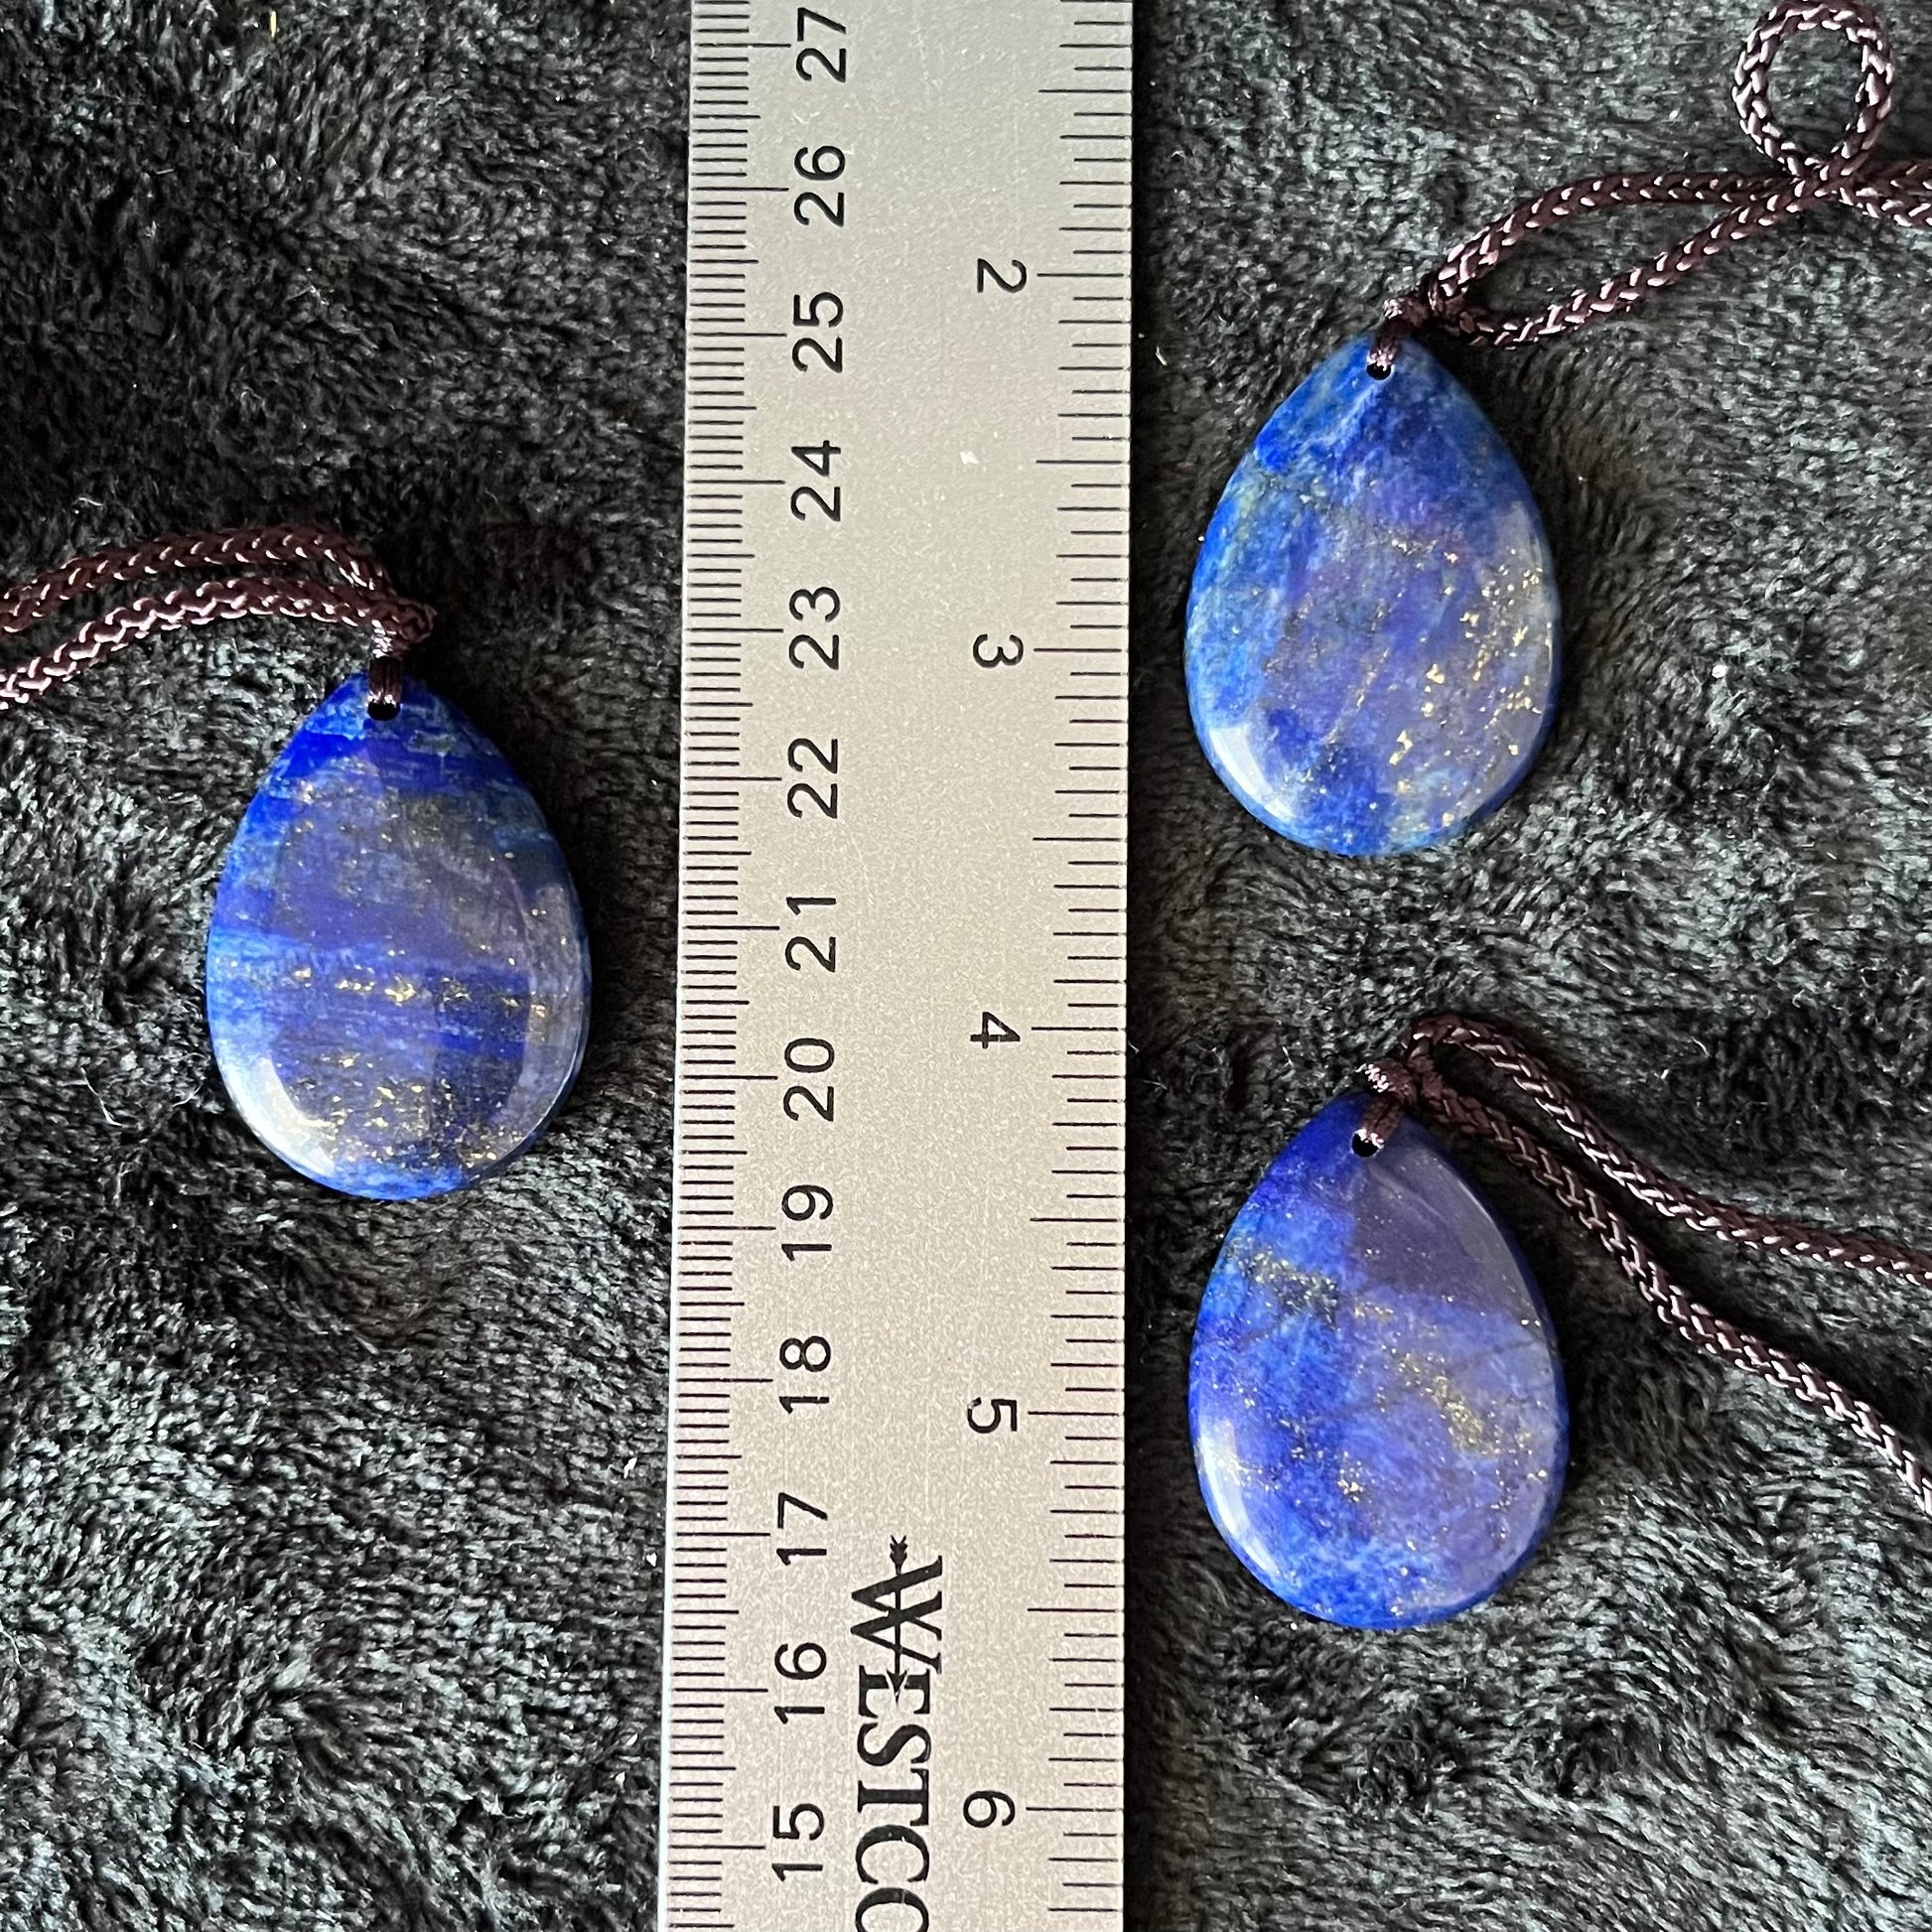 3 Exquisite lapis lazuli tear drop pendant necklaces, featuring deep blue gemstones suspended delicately from adjustable brown cords, displayed next to a ruler.  Pendants are approximately 1” long.